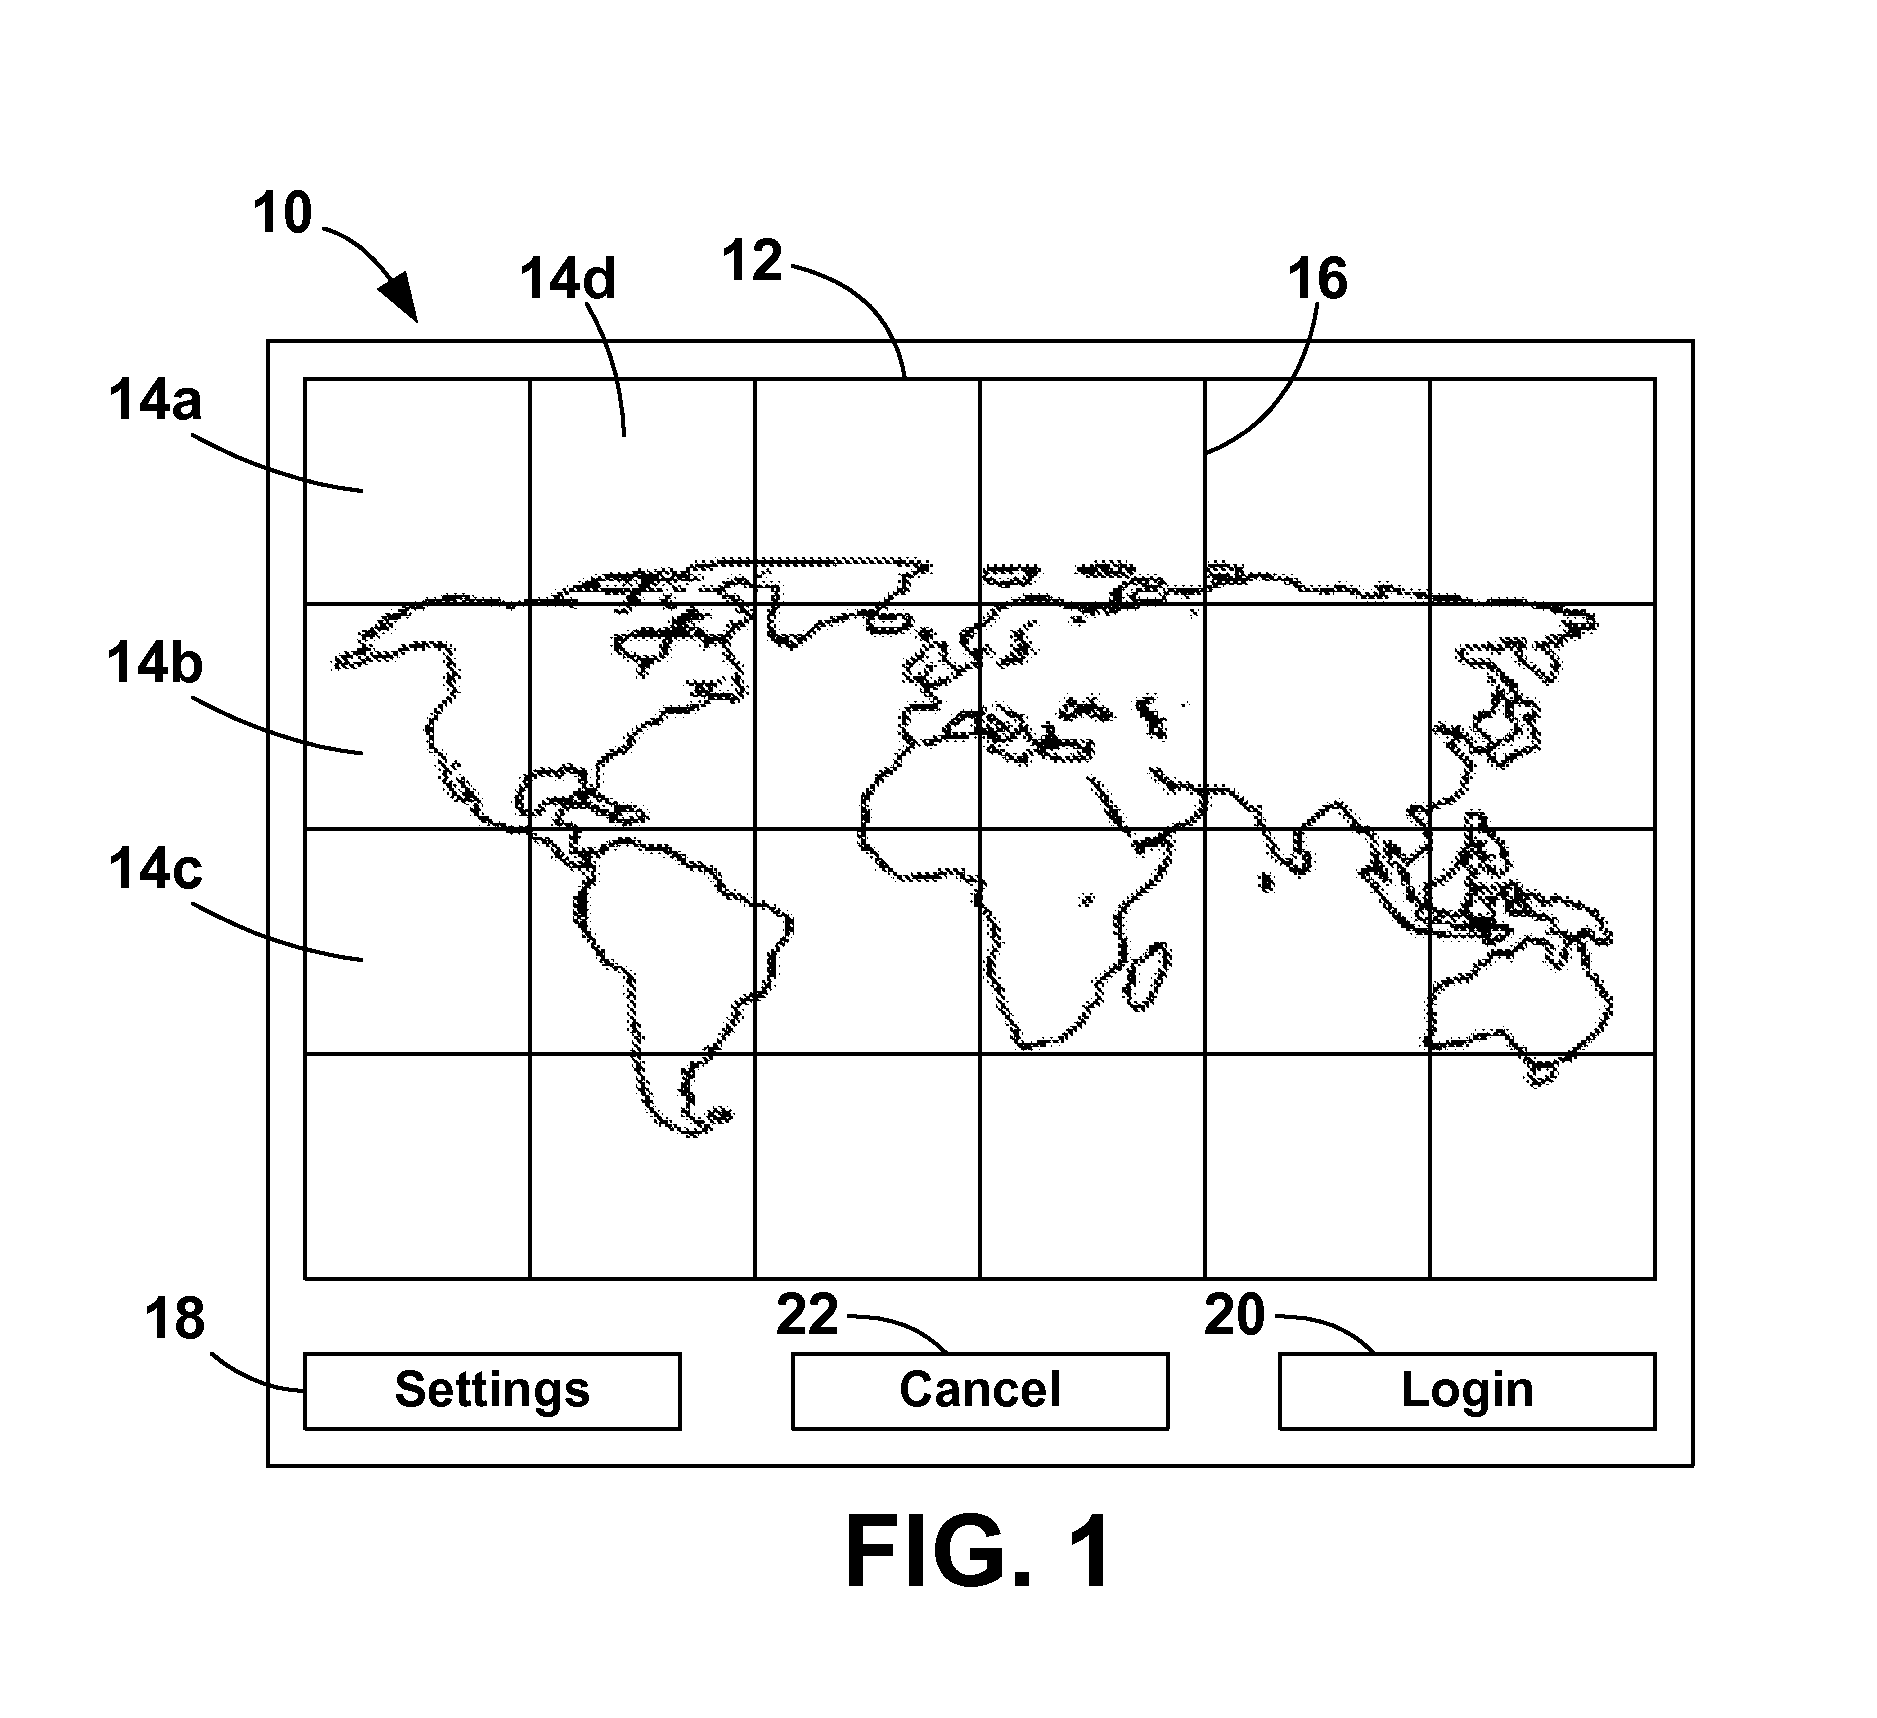 Method for Image-Based Authentication